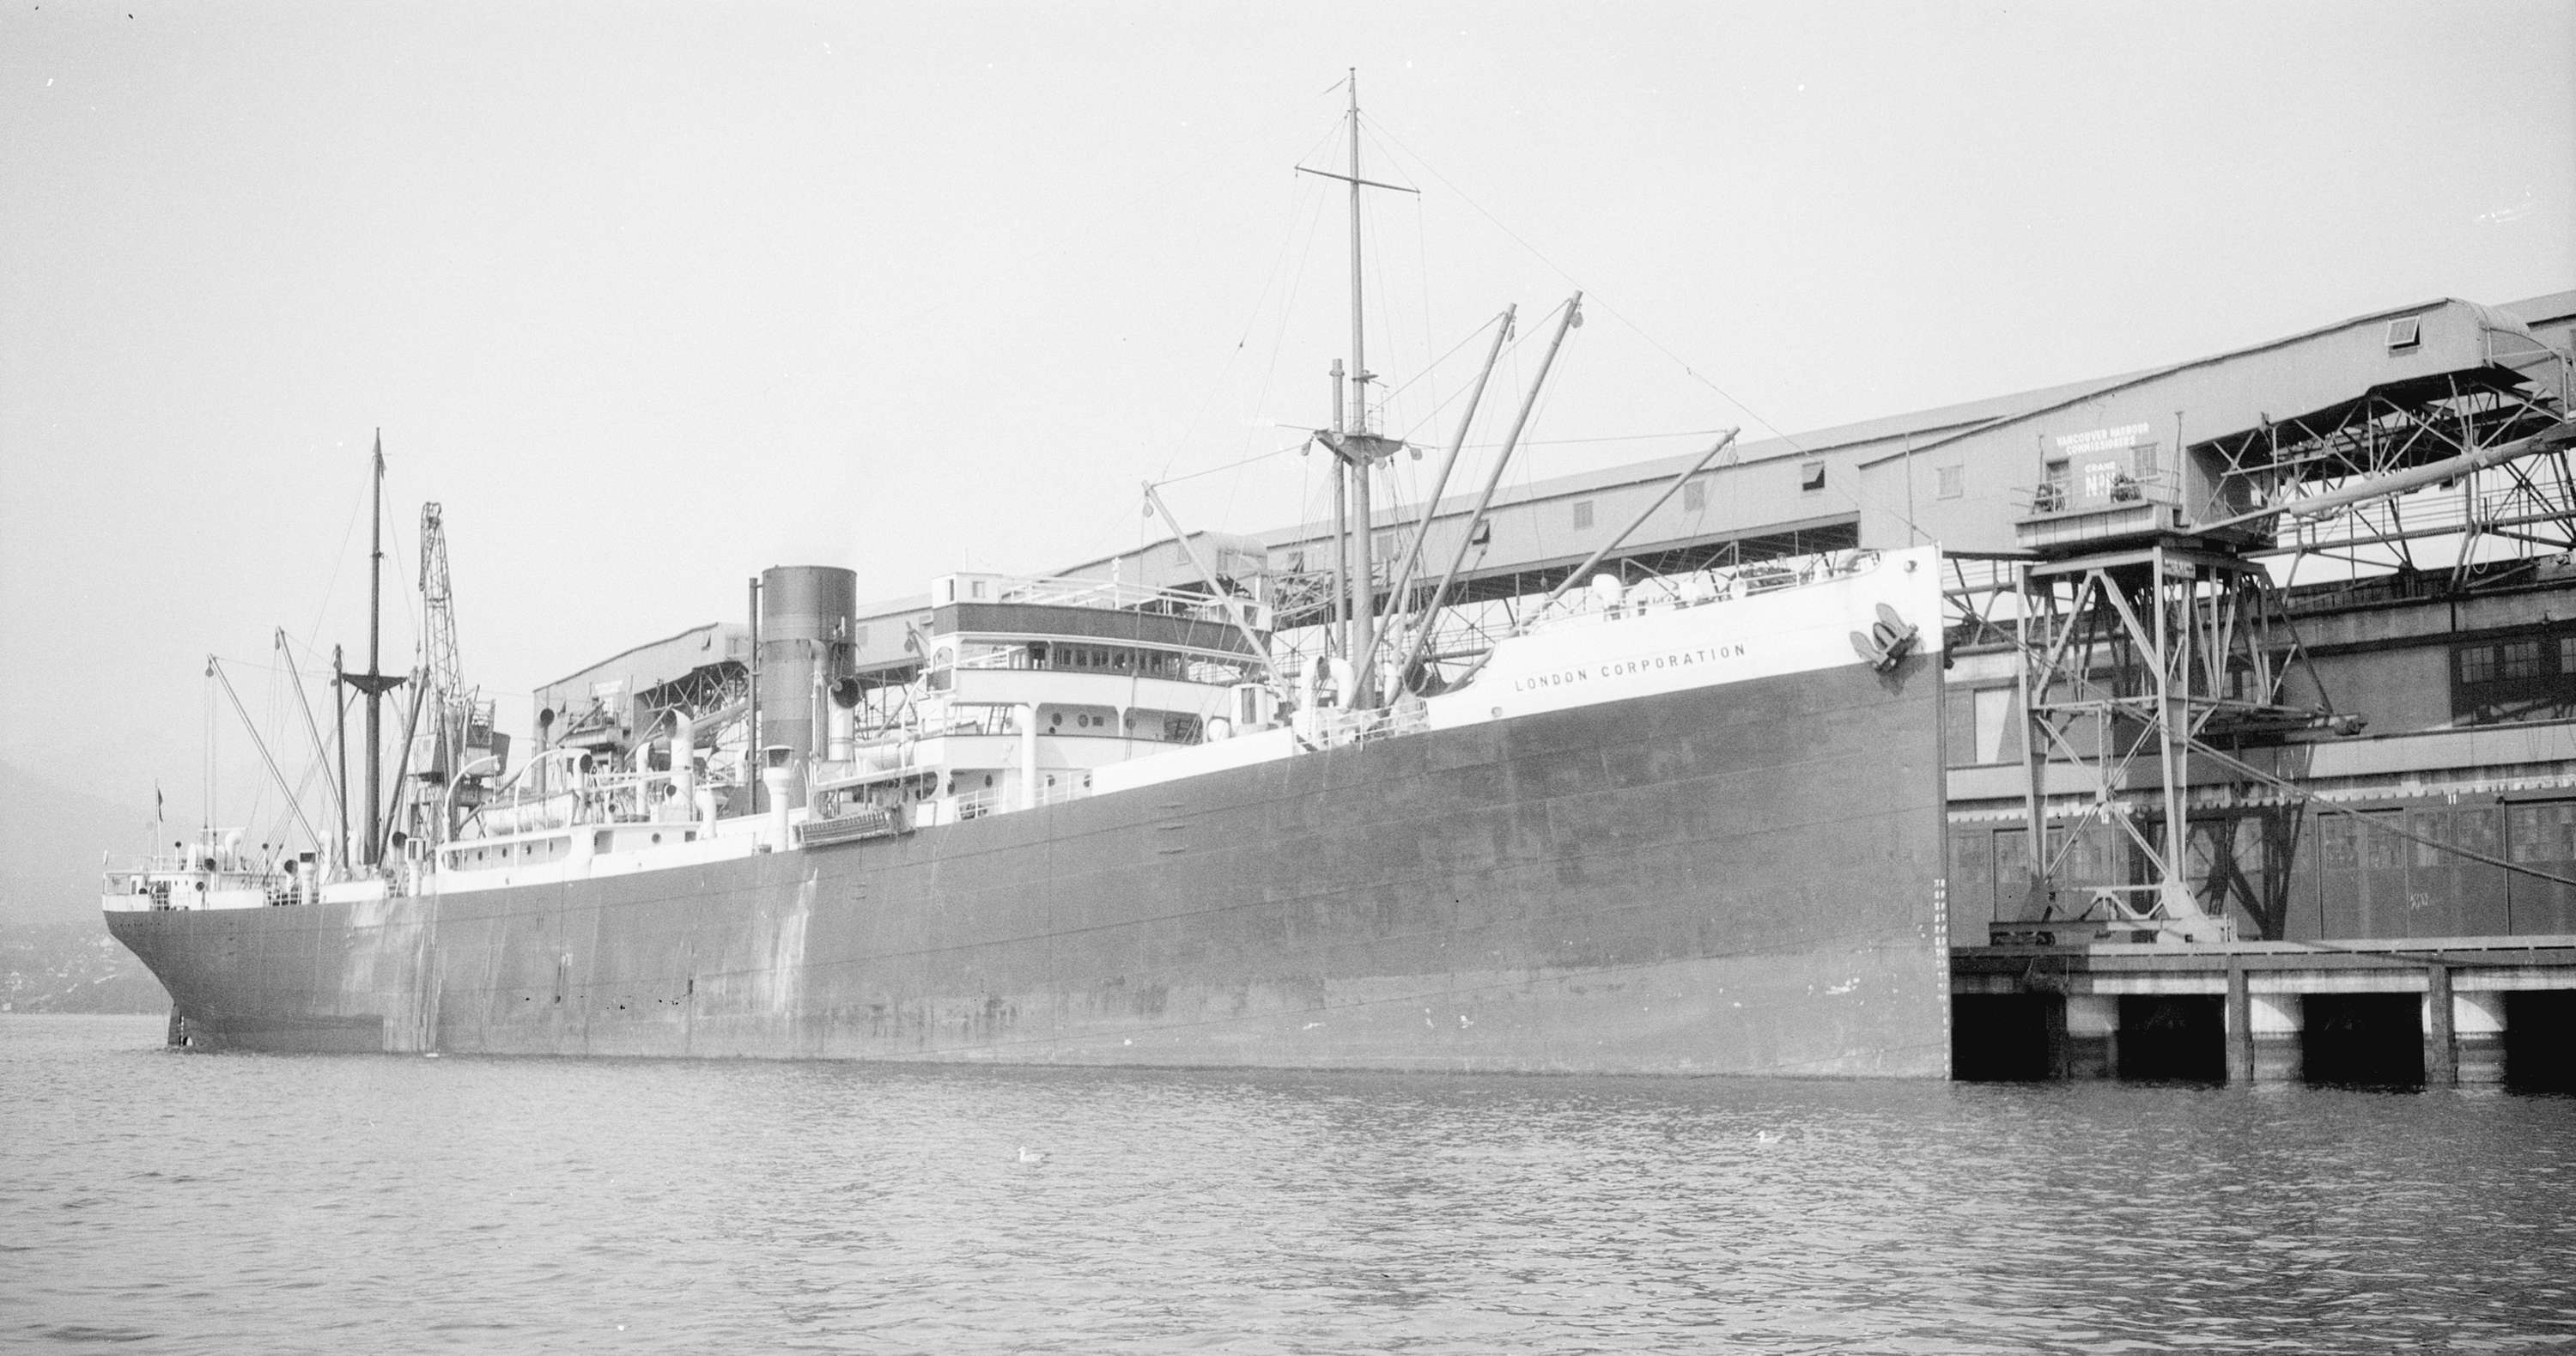 The SS Benlomond docked in Vancouver, Canada, under her previous name, London Corporation. /Walter E. Frost/City of Vancouver Archives